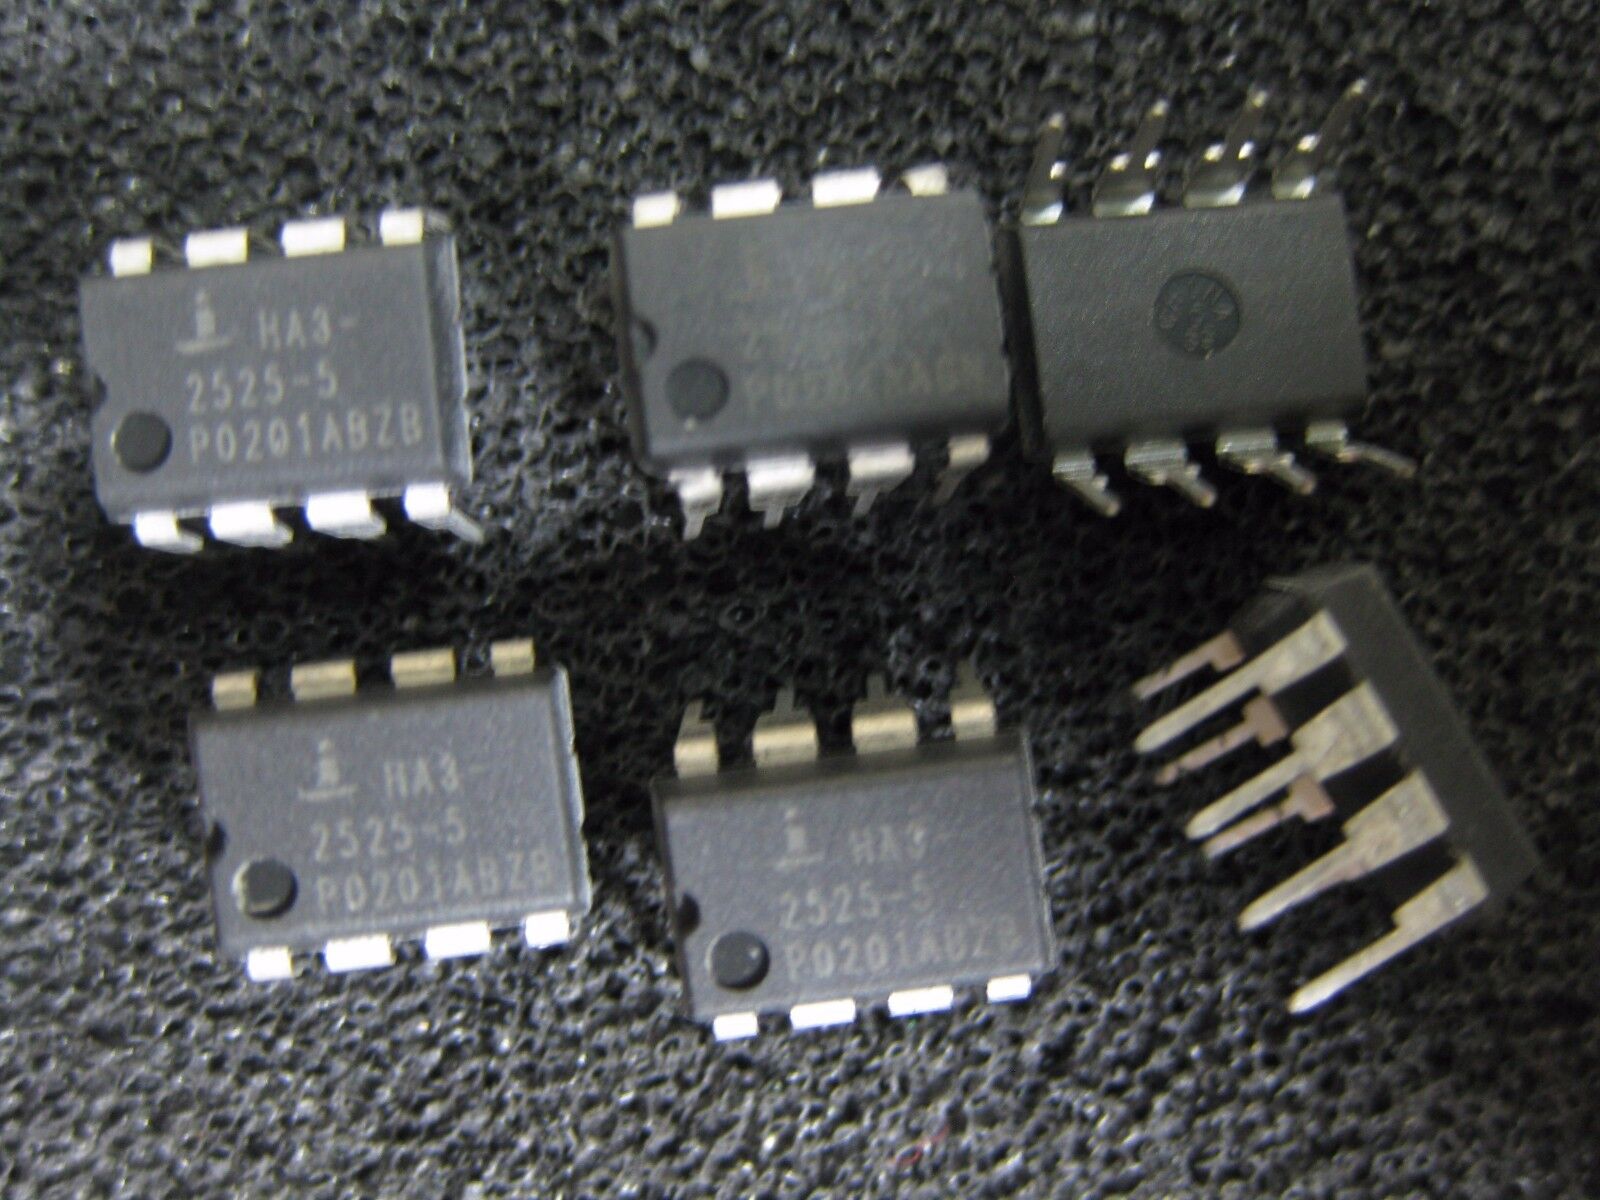 10X HA3-2525-5 20MHz,High Slew Rate,Uncompensated,High Input Impedance Amplifier